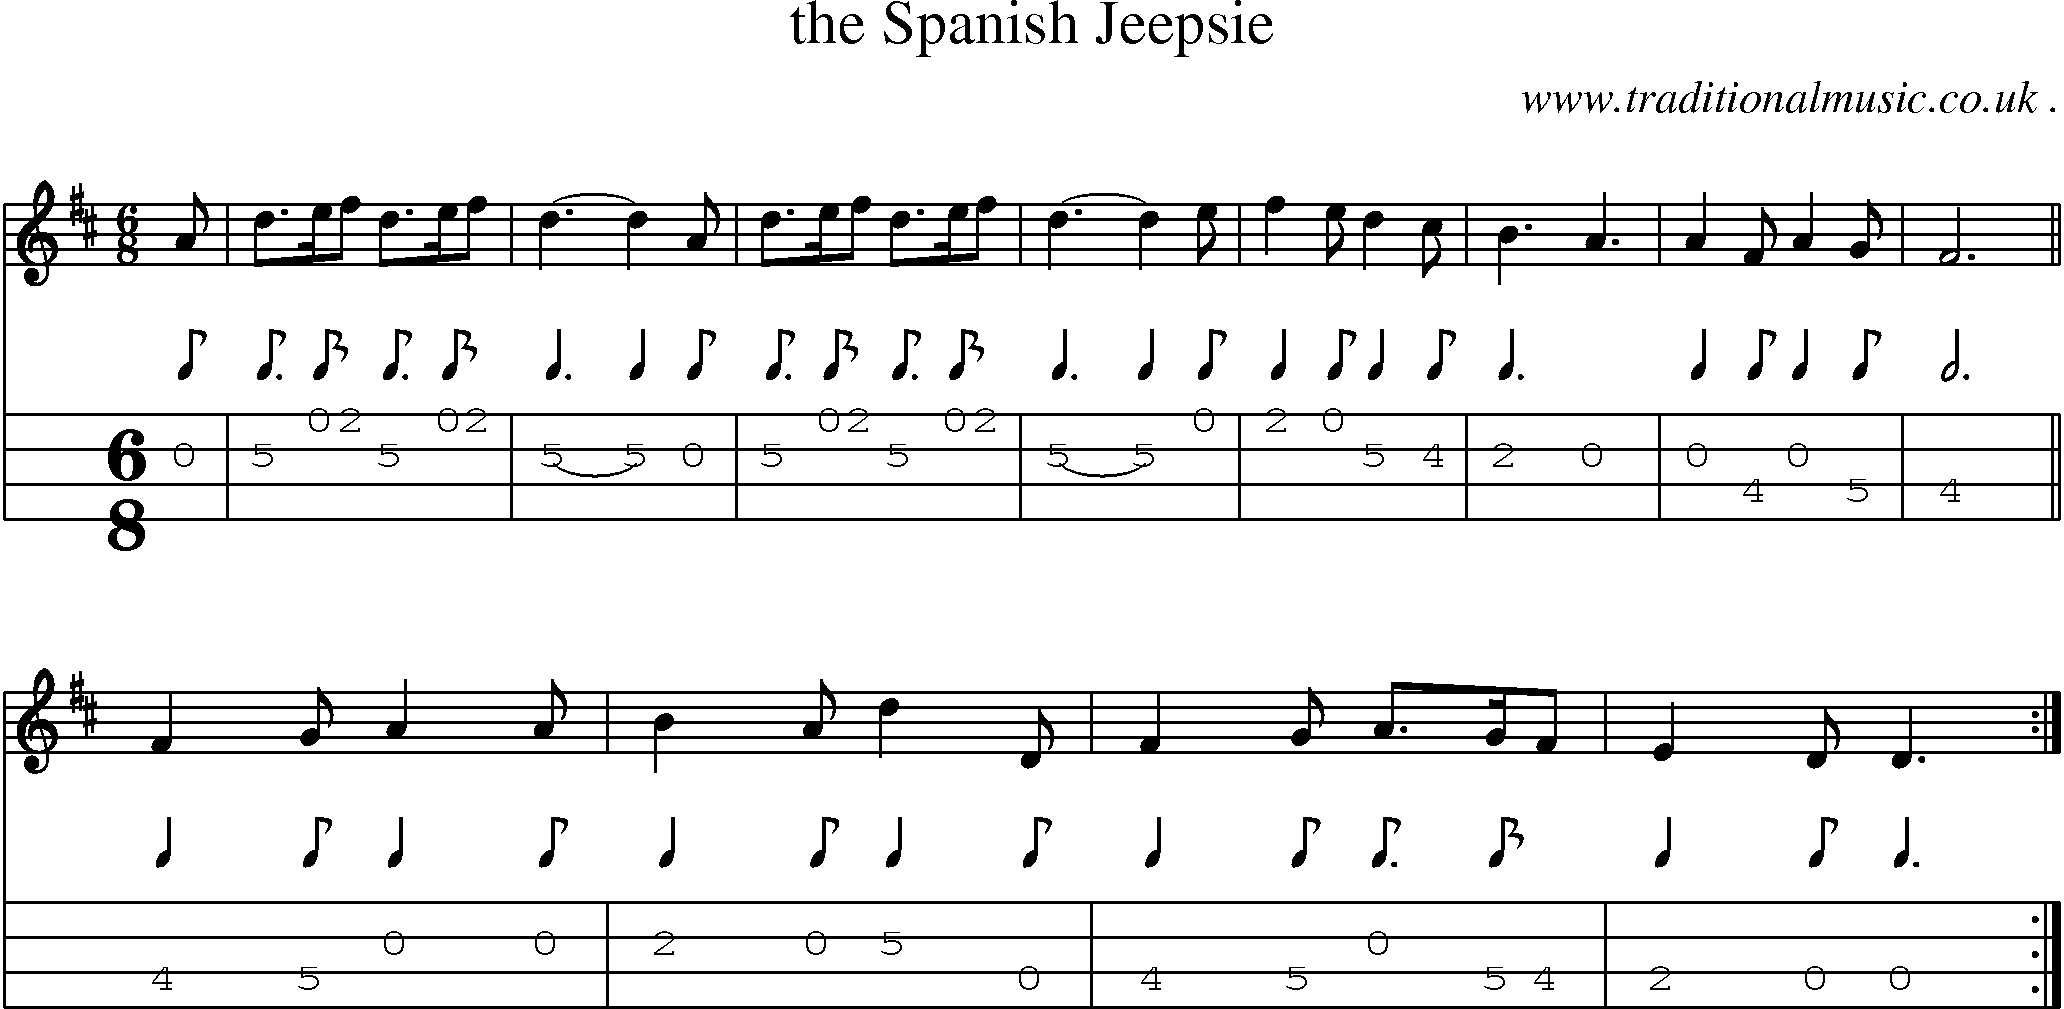 Sheet-music  score, Chords and Mandolin Tabs for The Spanish Jeepsie